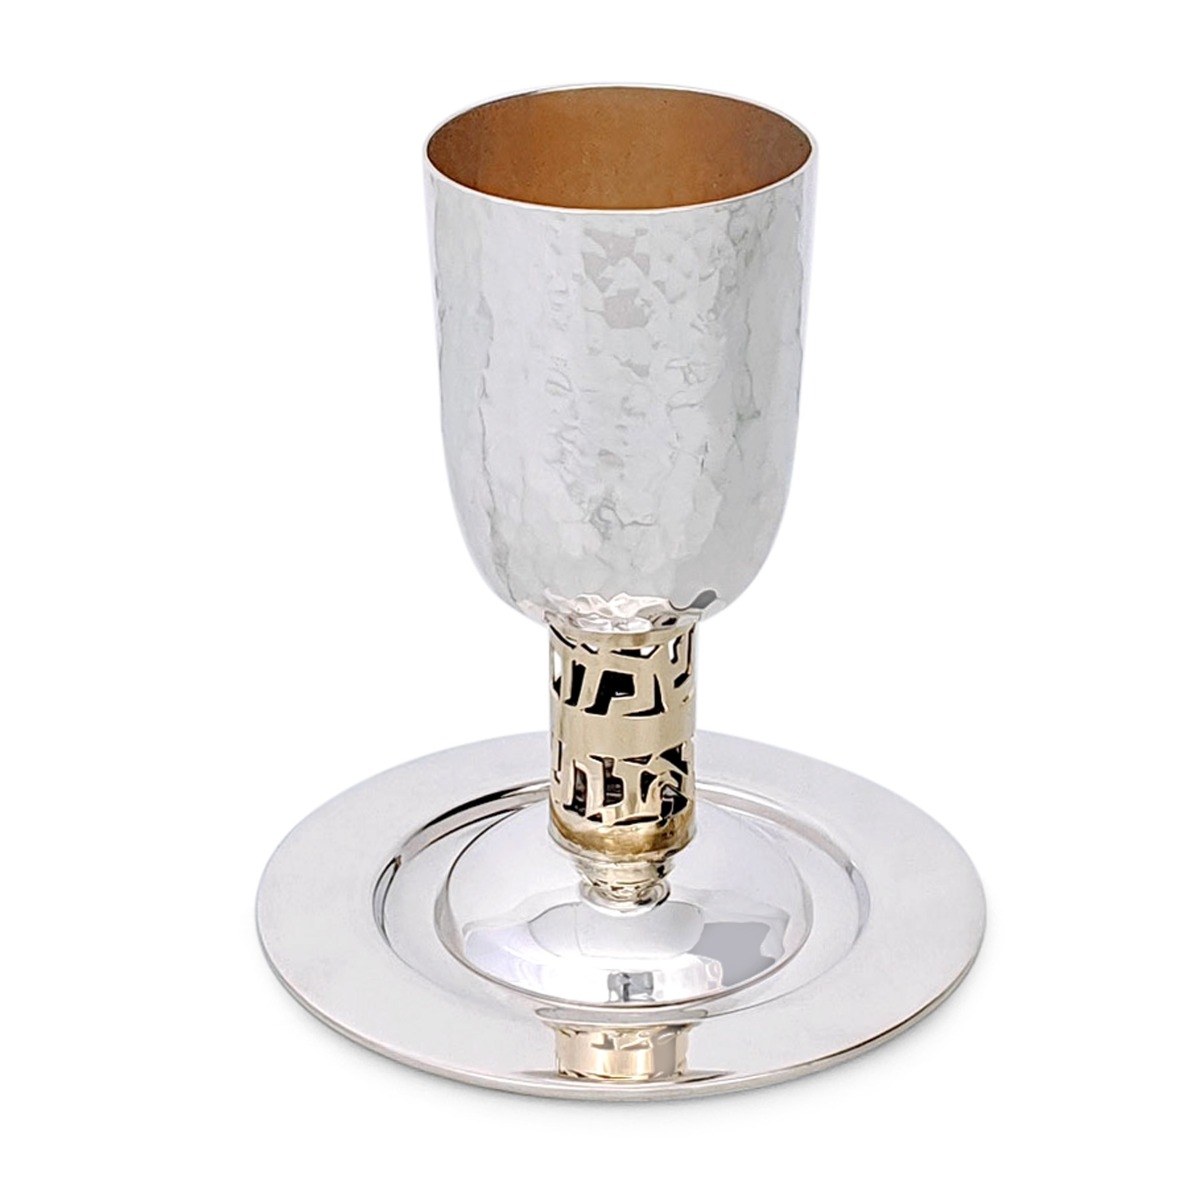 Bier Judaica Handcrafted Sterling Silver Hammered Kiddush Cup With Psalms Verse - 1